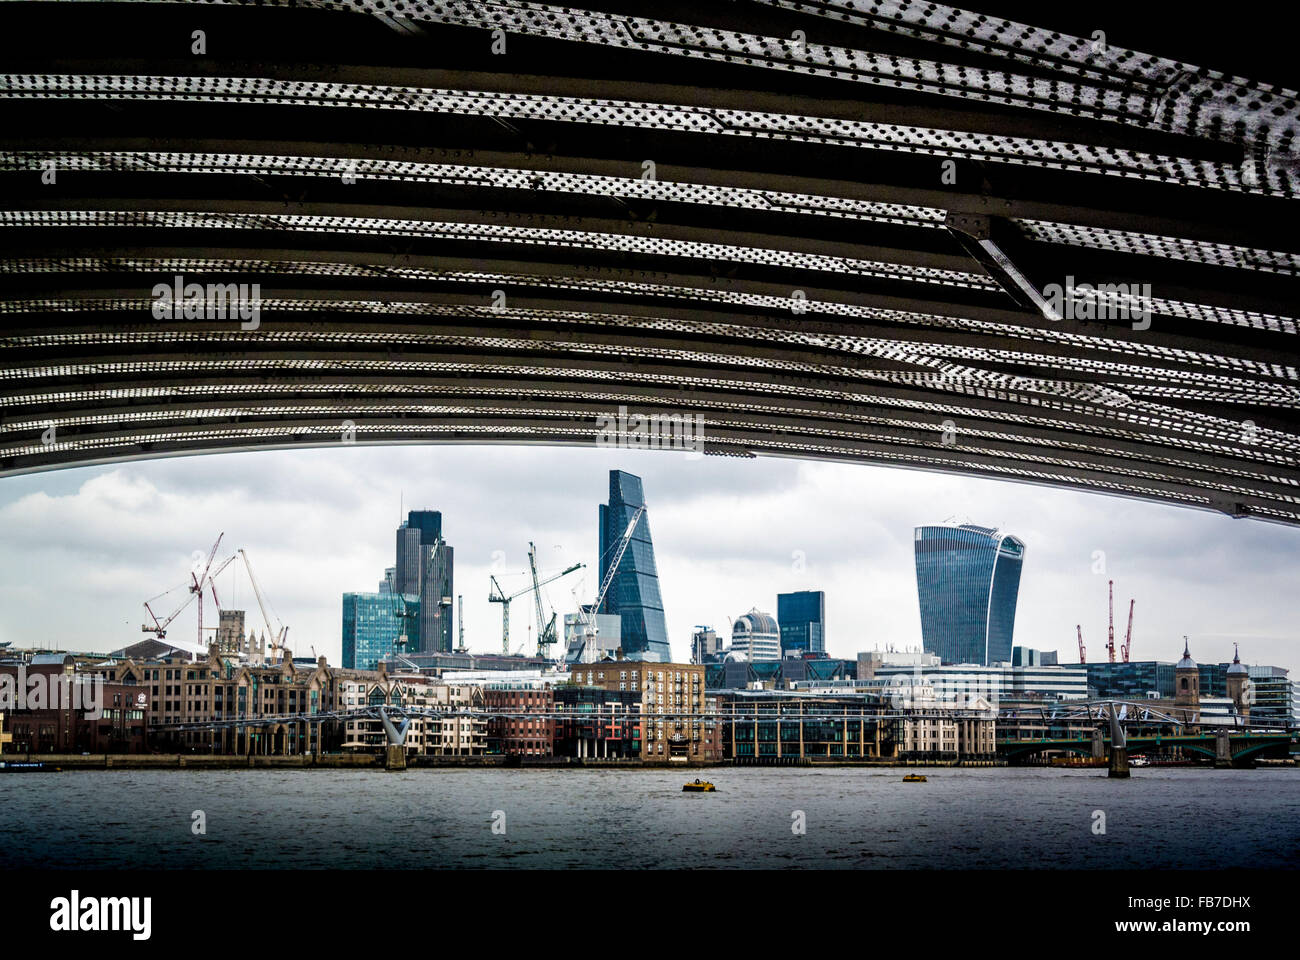 Financial district of London viewed through the arch of Blackfriars Bridge over the River Thames. Stock Photo